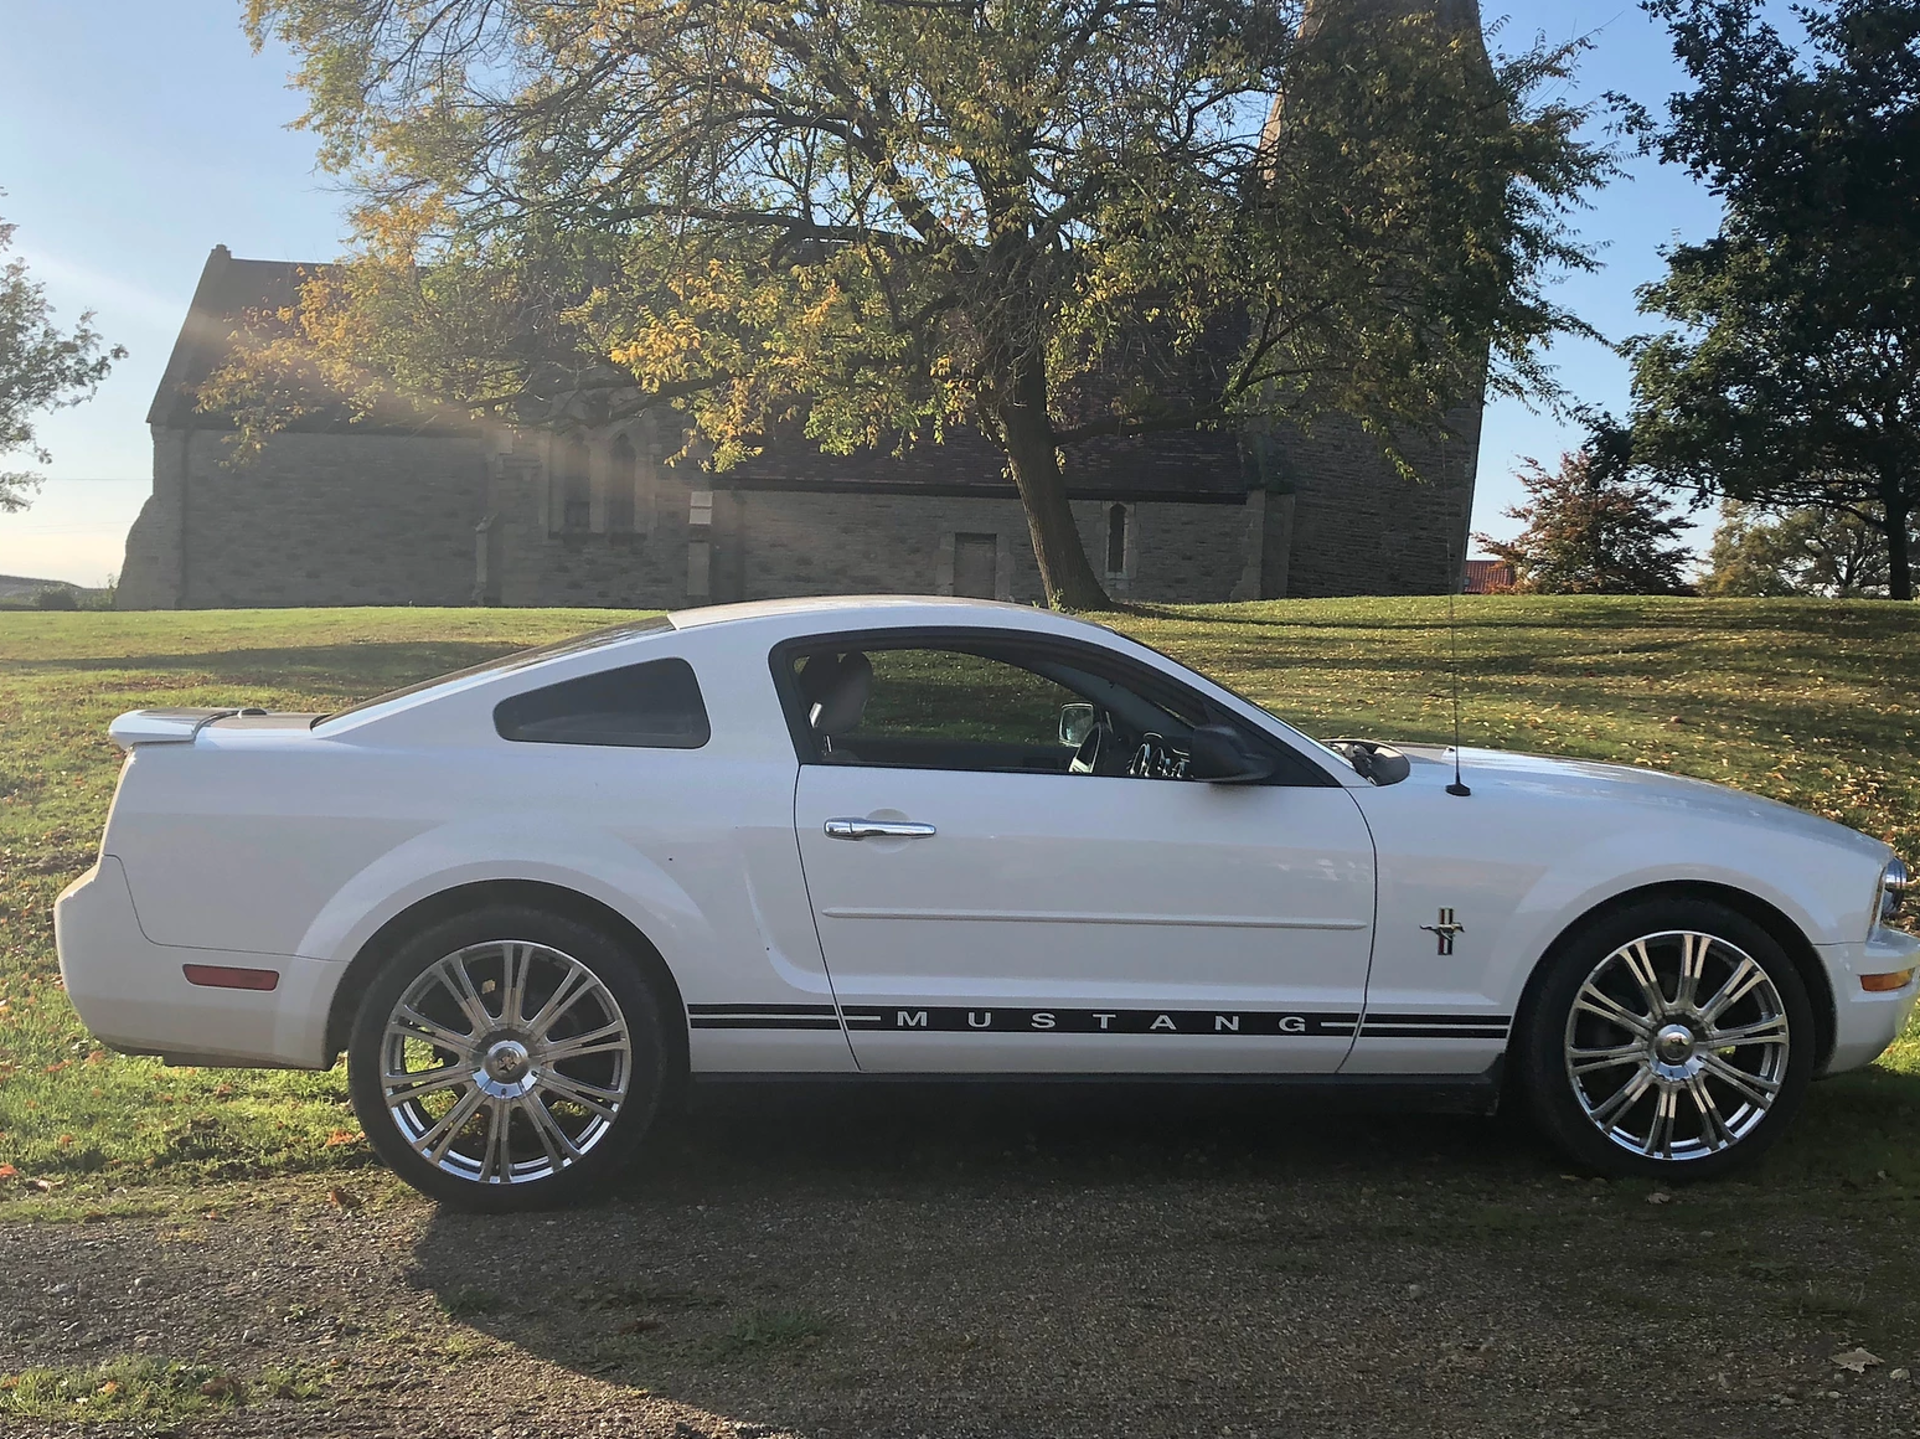 2007 Ford Mustang GT - Image 9 of 9